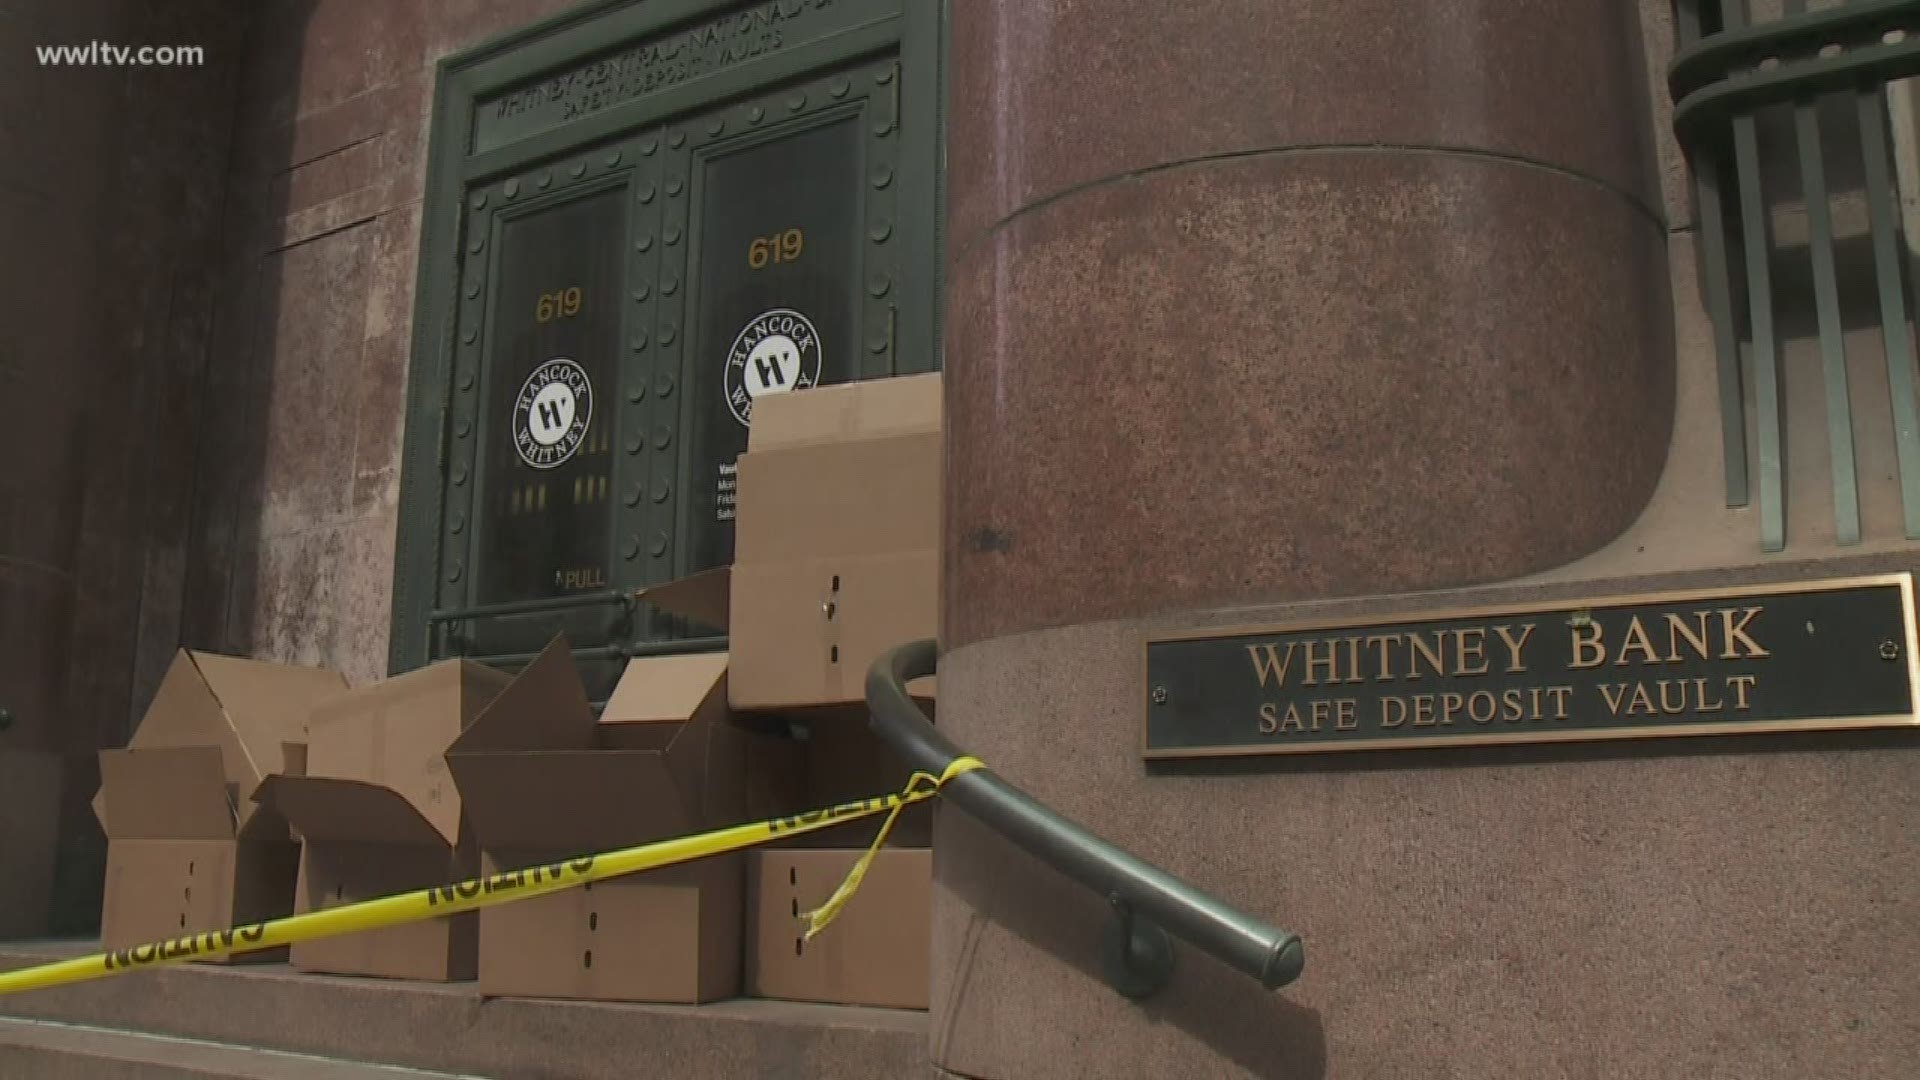 Some of the paperwork is expected to date back to the 1800s, when Hancock Whitney first opened its doors